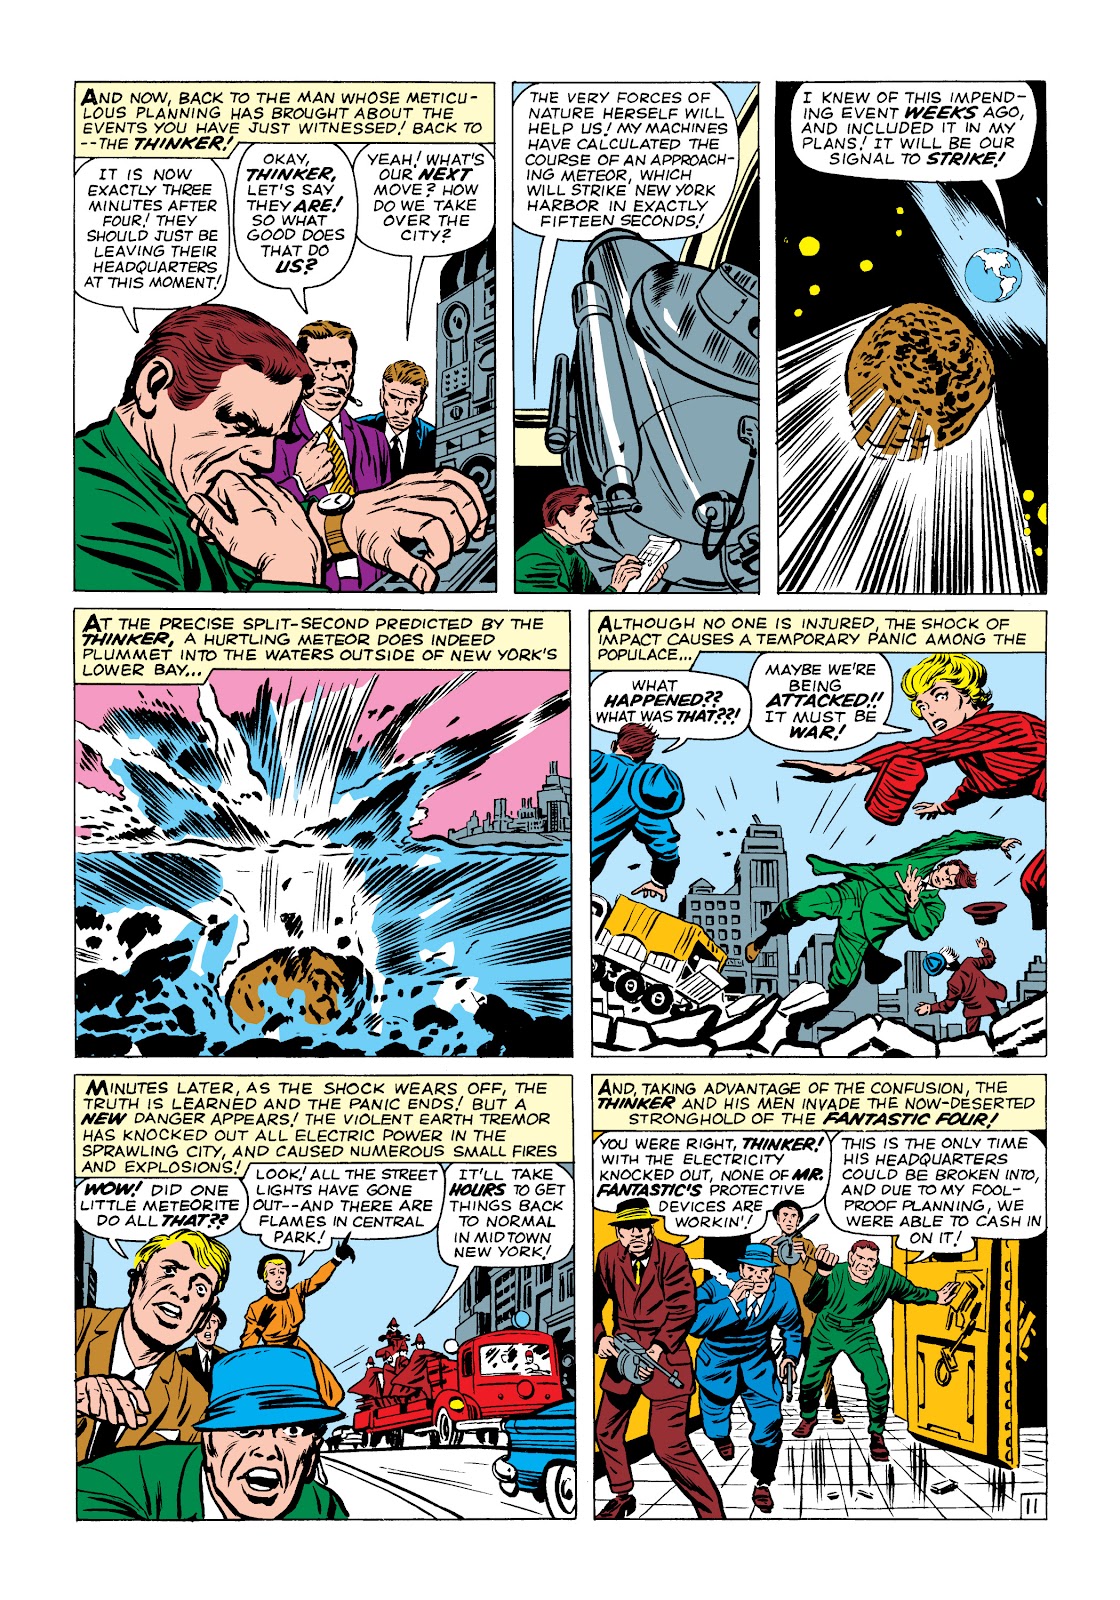 Read online Marvel Masterworks: The Fantastic Four comic - Issue # TPB 2 (Part 2) - 11